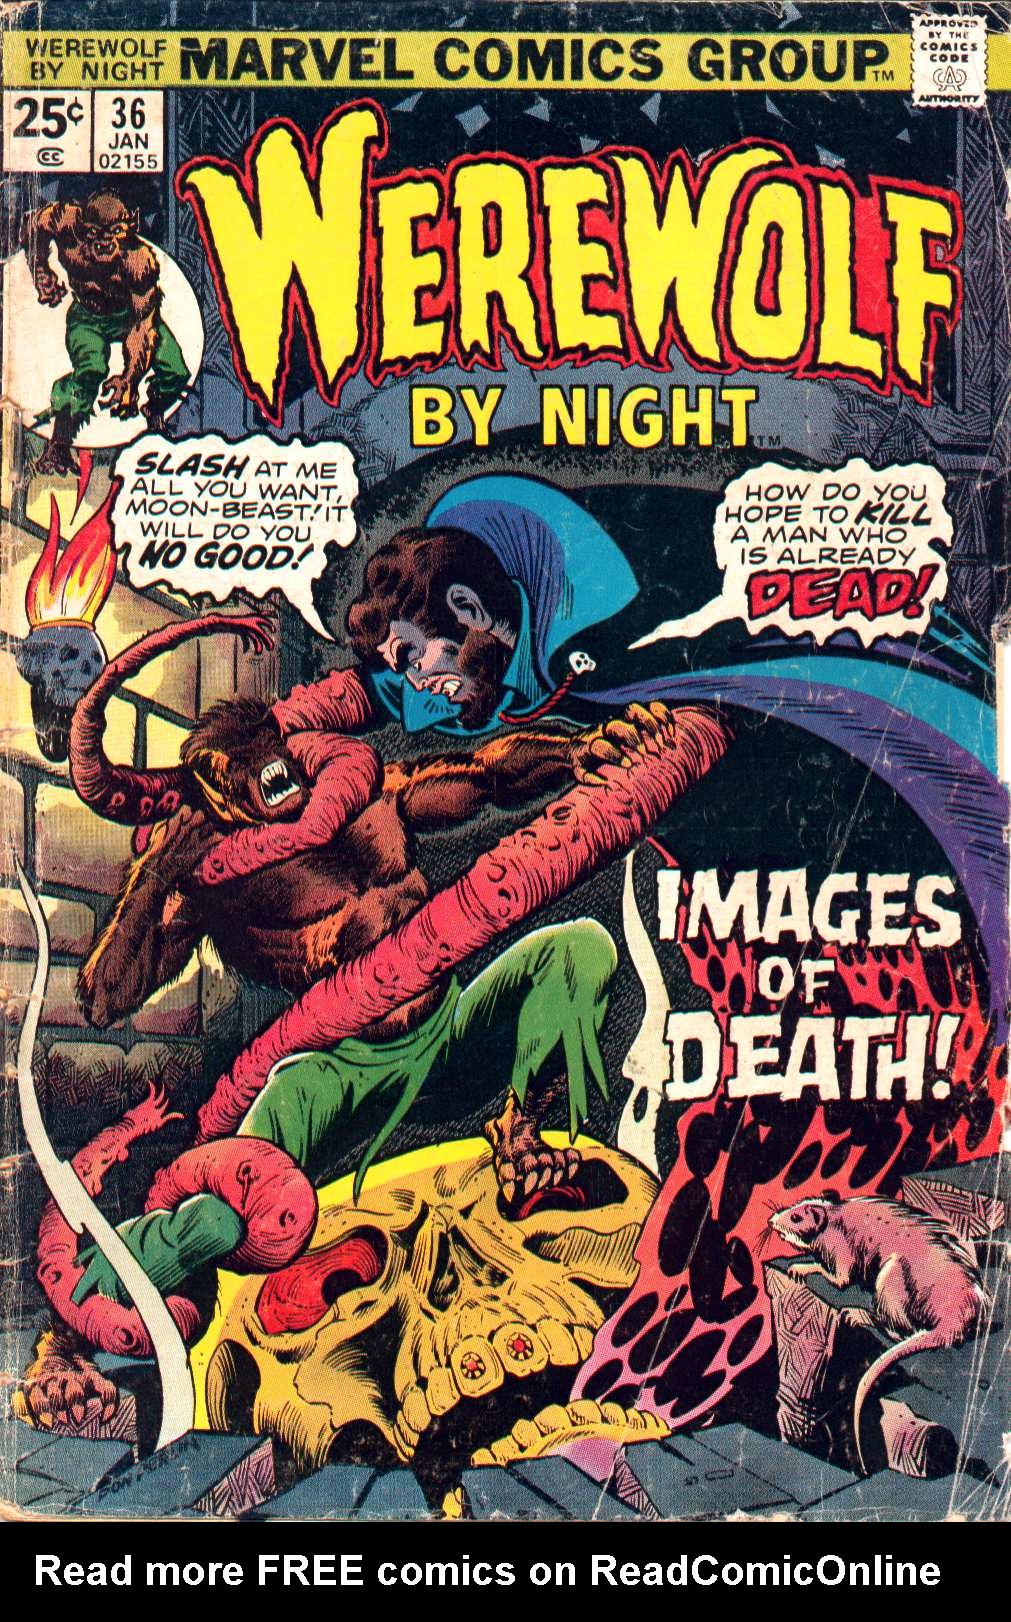 Marvel's stab at horror: “Werewolf by Night”